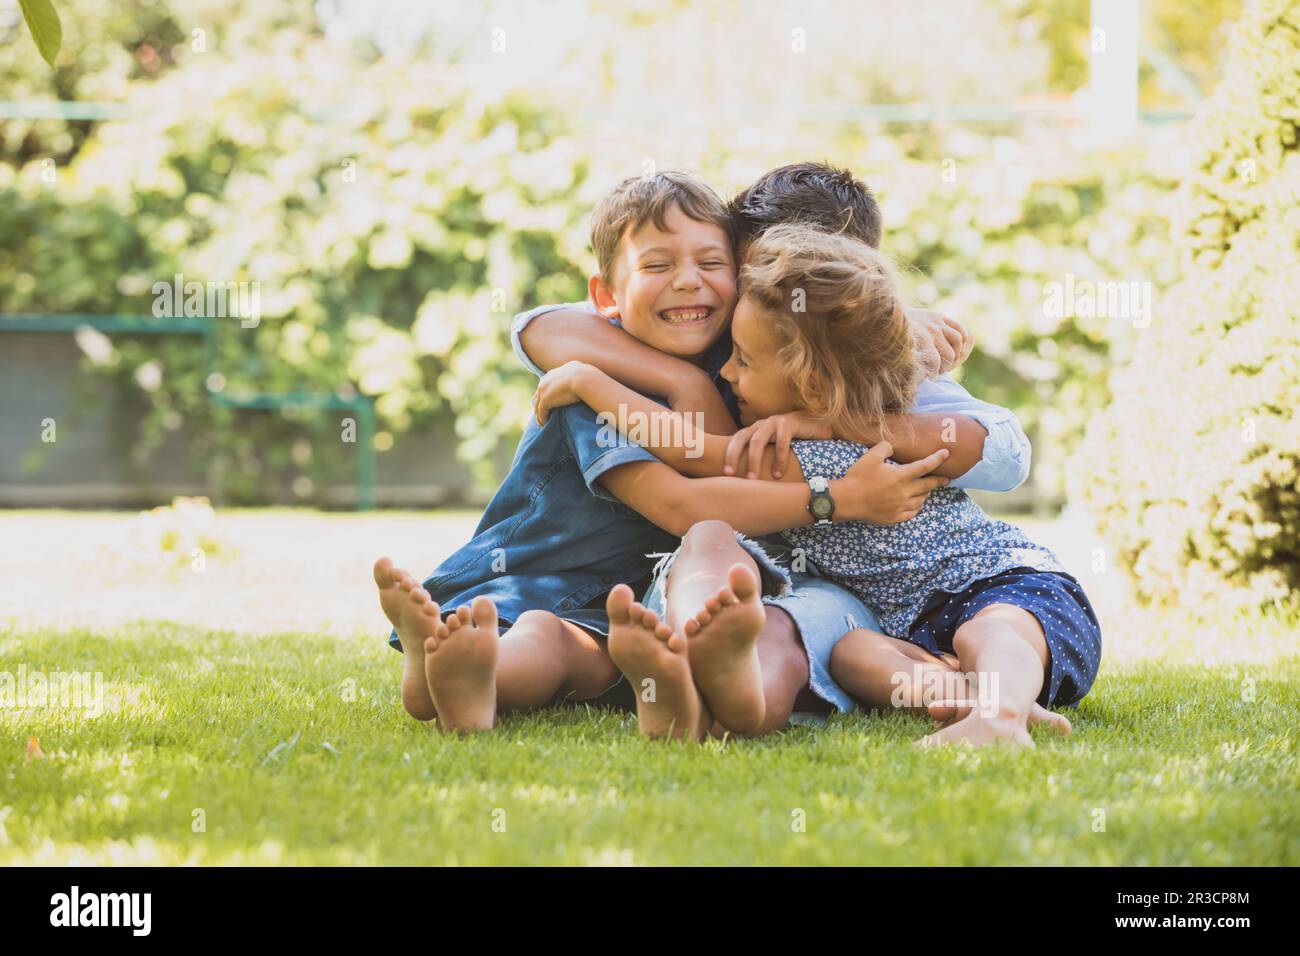 Three little kids are hugging together outdoors Stock Photo